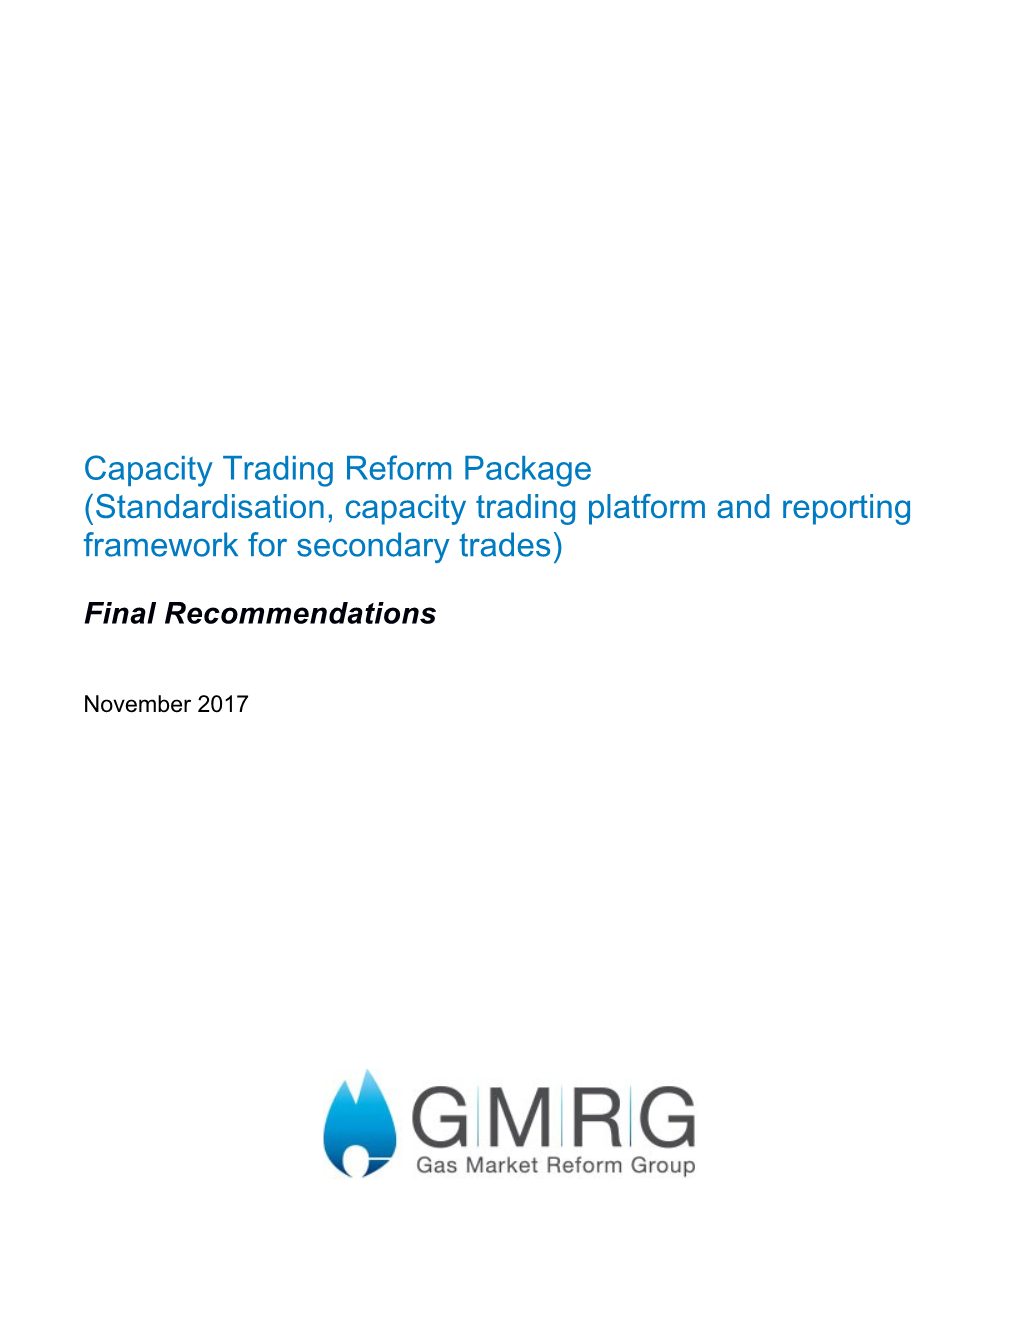 Capacity Trading Reform Package Final Recommendatons